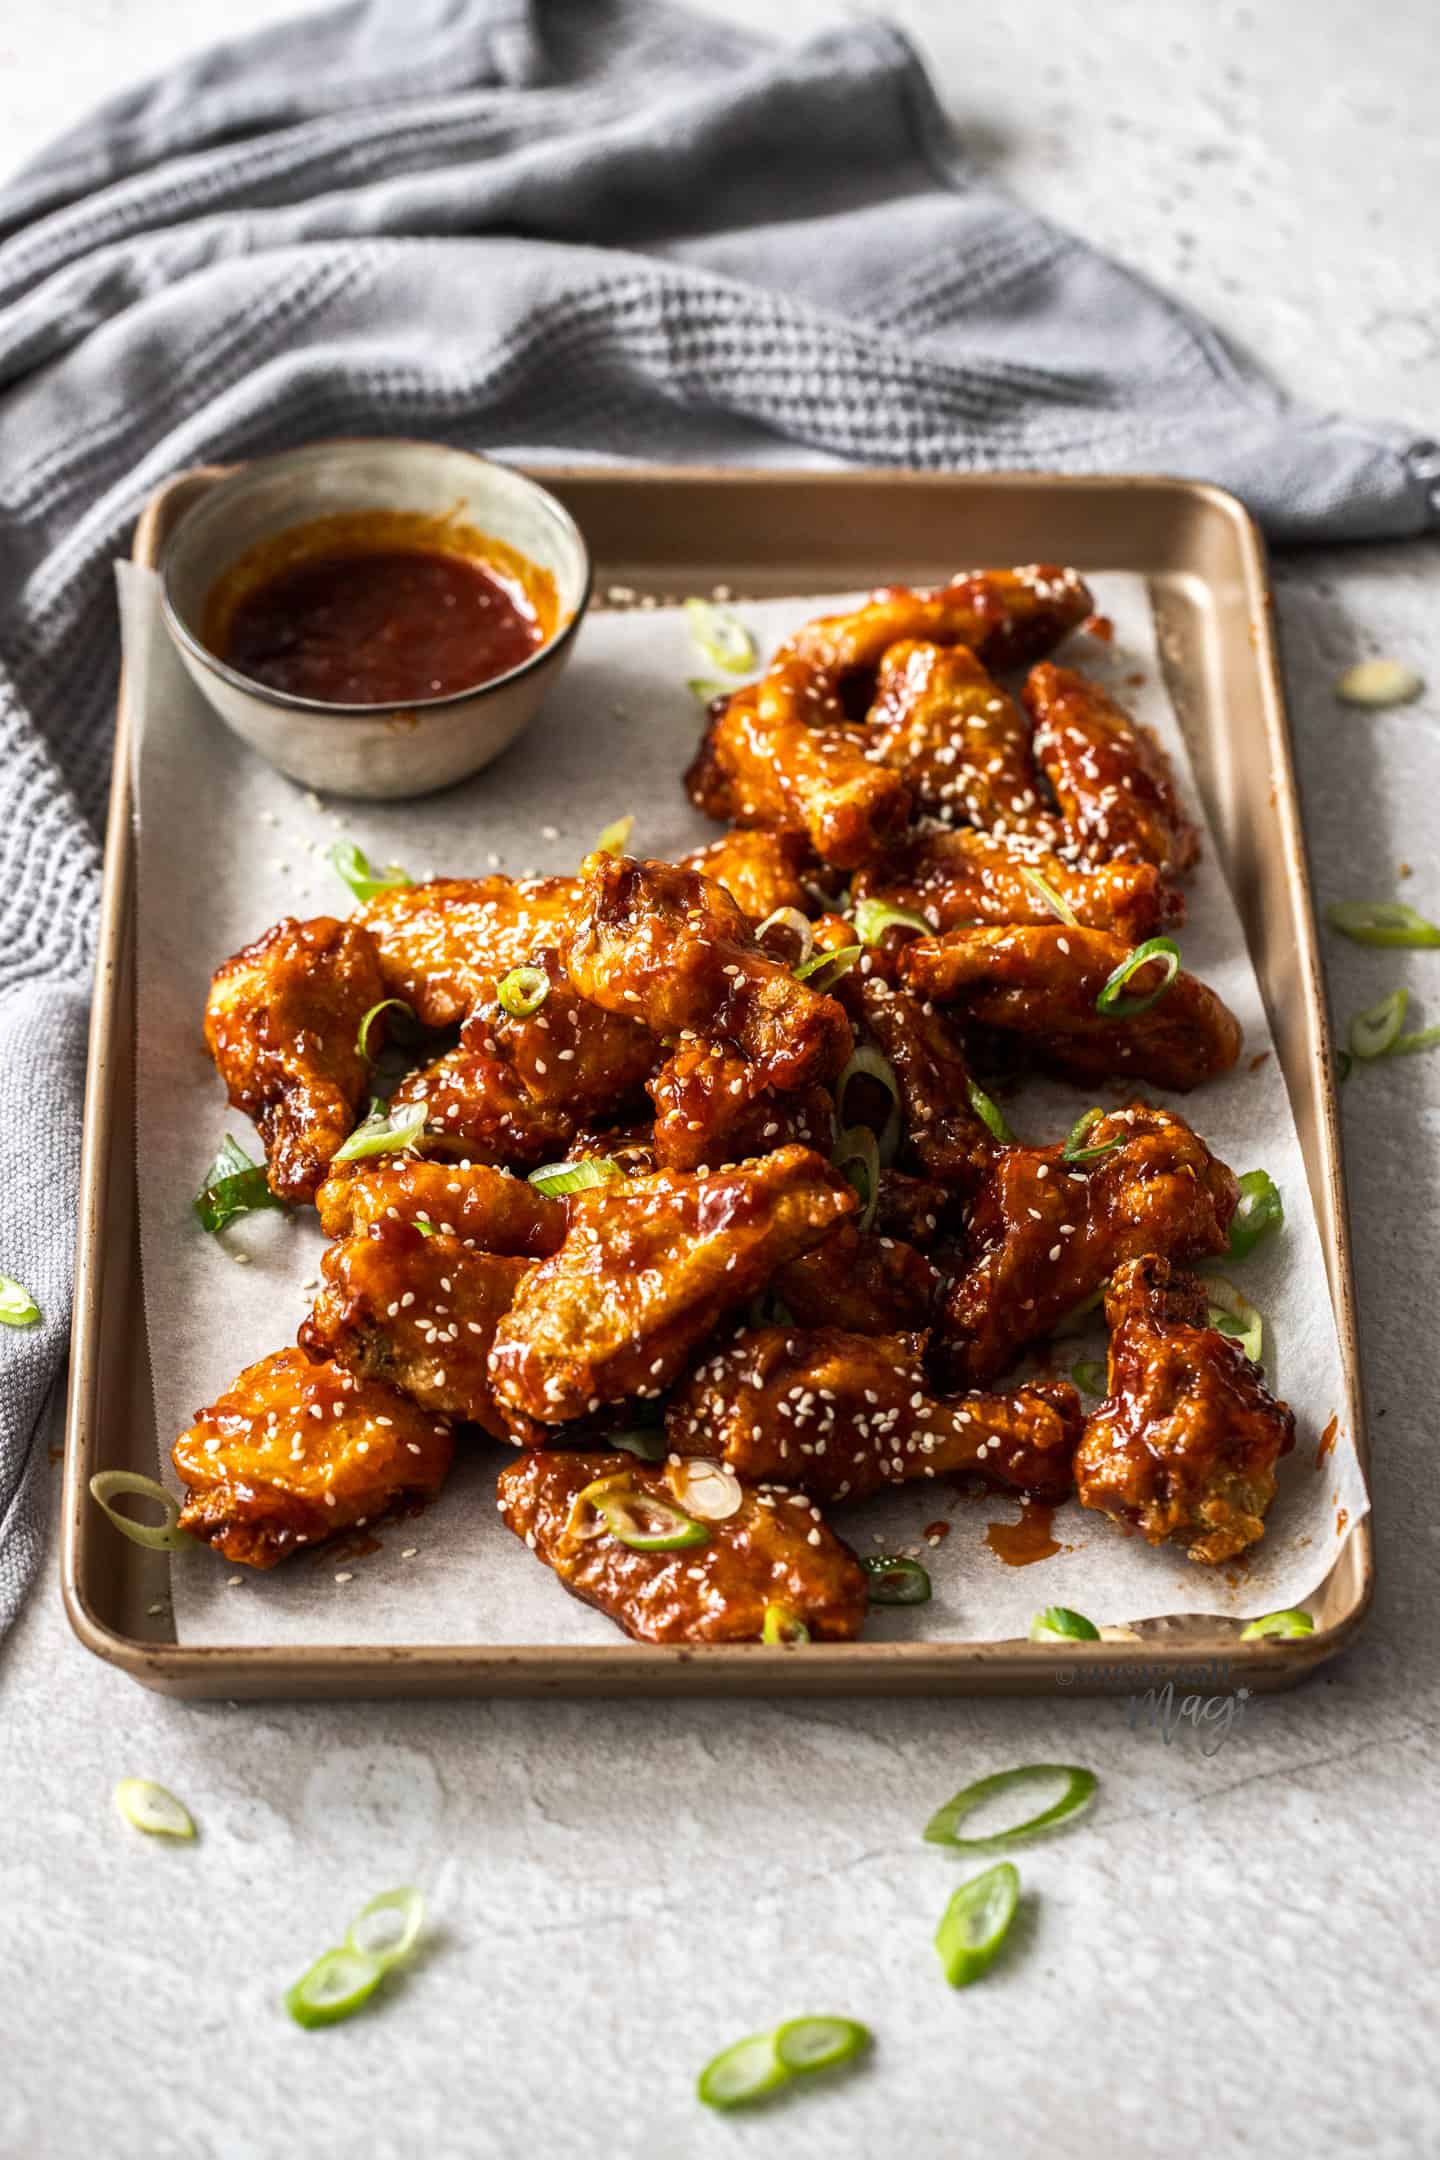 A of a pile of fried sticky chicken wings on a baking tray.